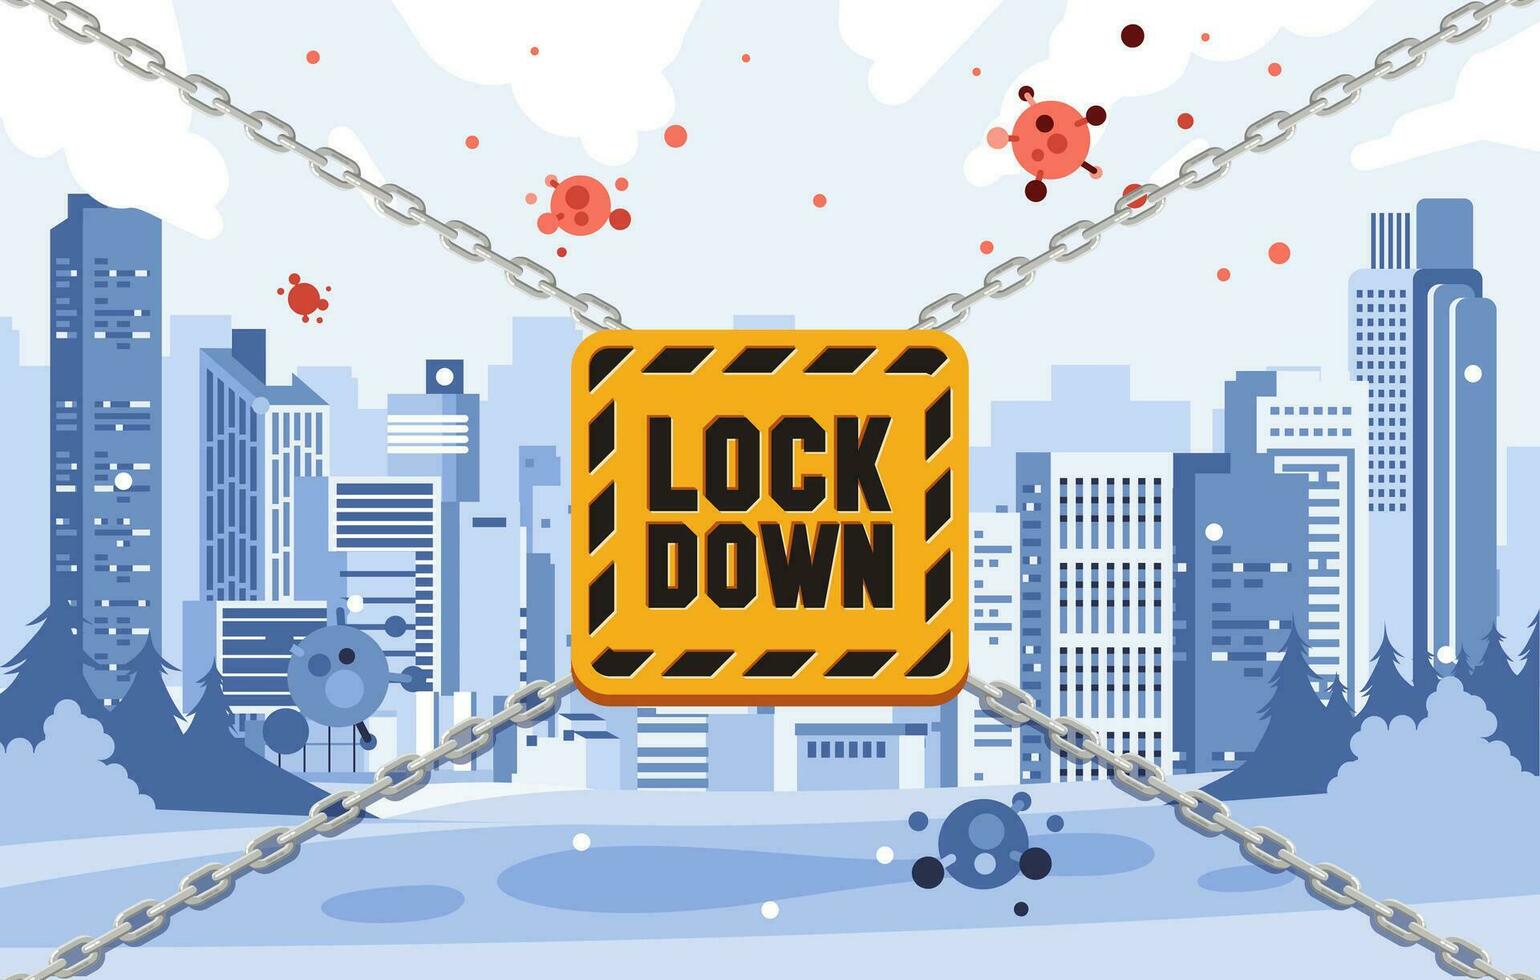 lockdown city illustration to prevent the contagious of virus spreading flat vector illustration